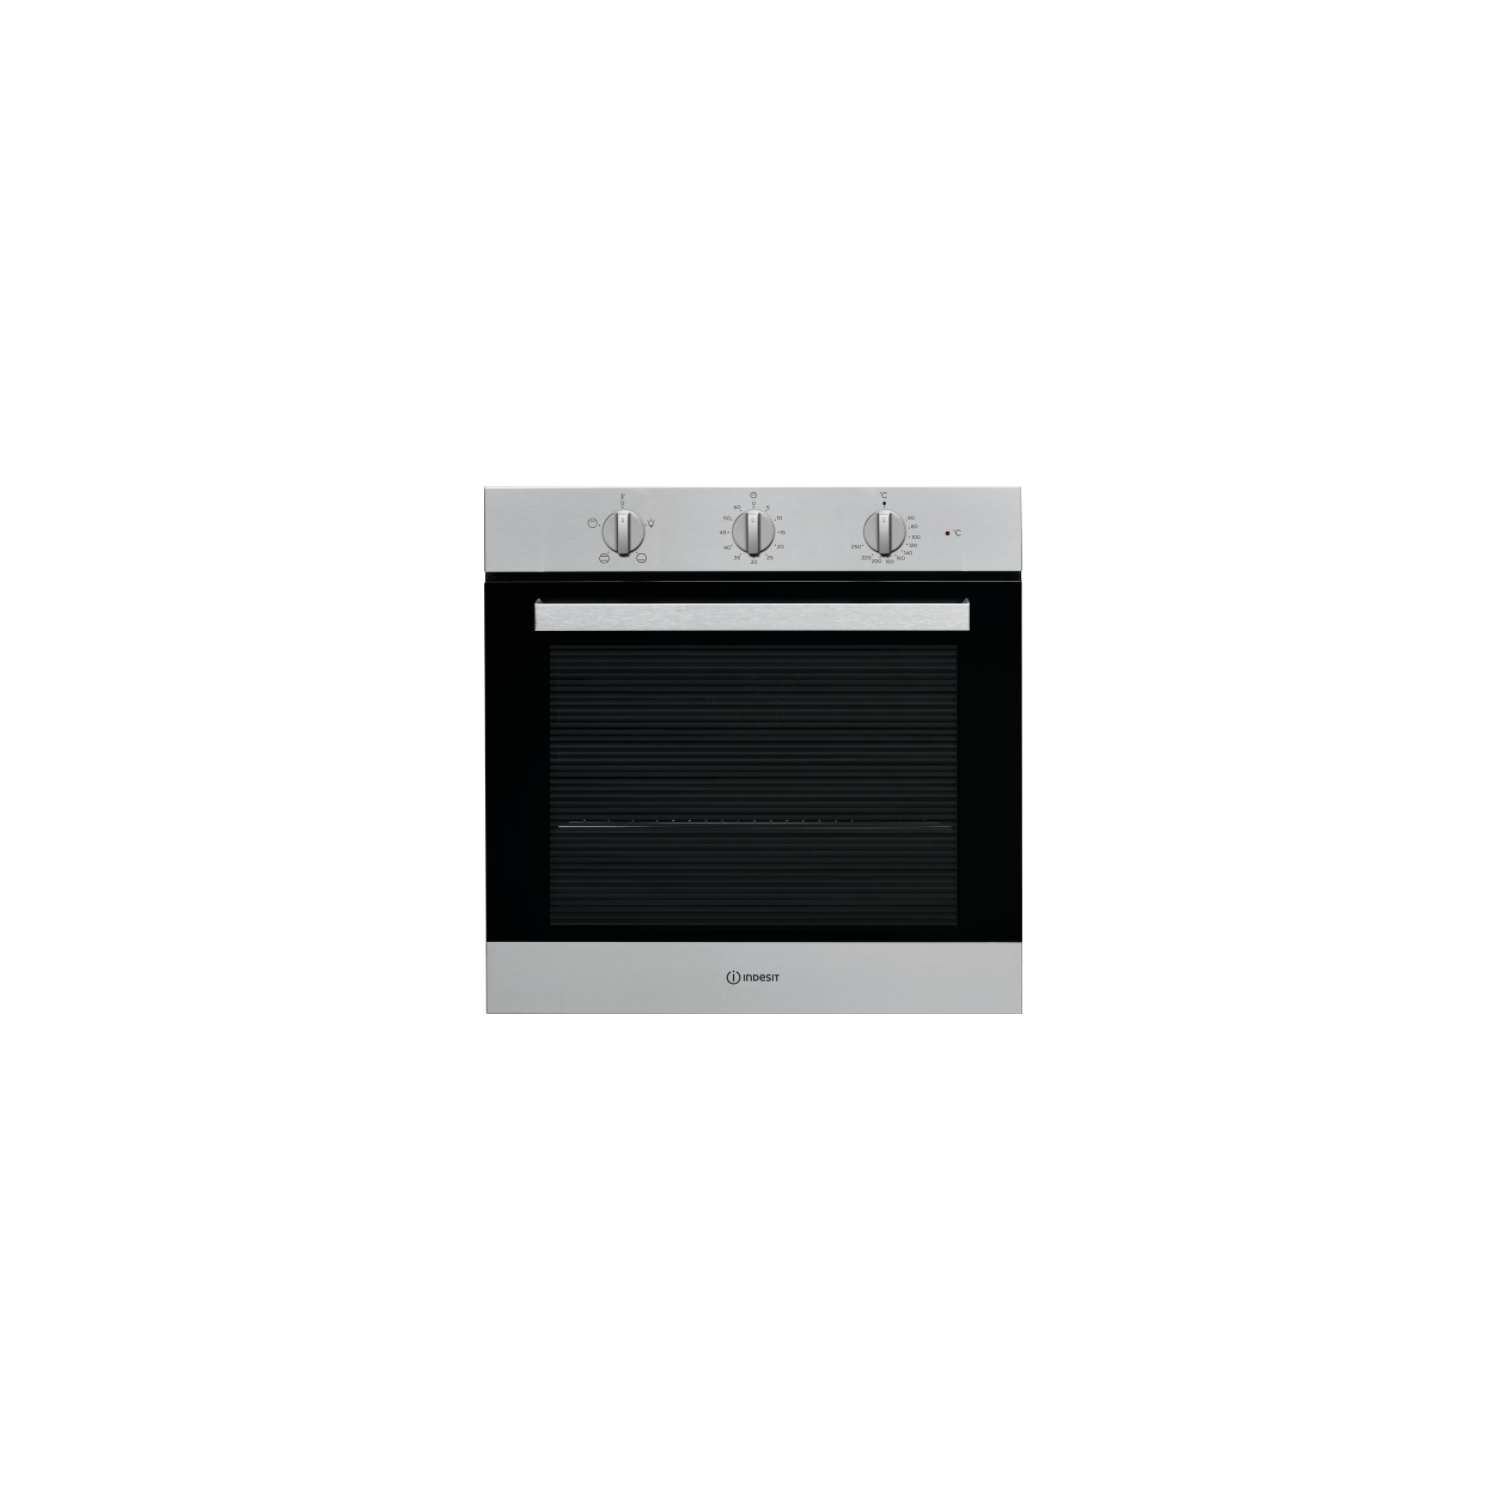 INDESIT IFW6230IXUK 59.5CM BUILT IN ELECTRIC SINGLE OVEN - STAINLESS STEEL - 0